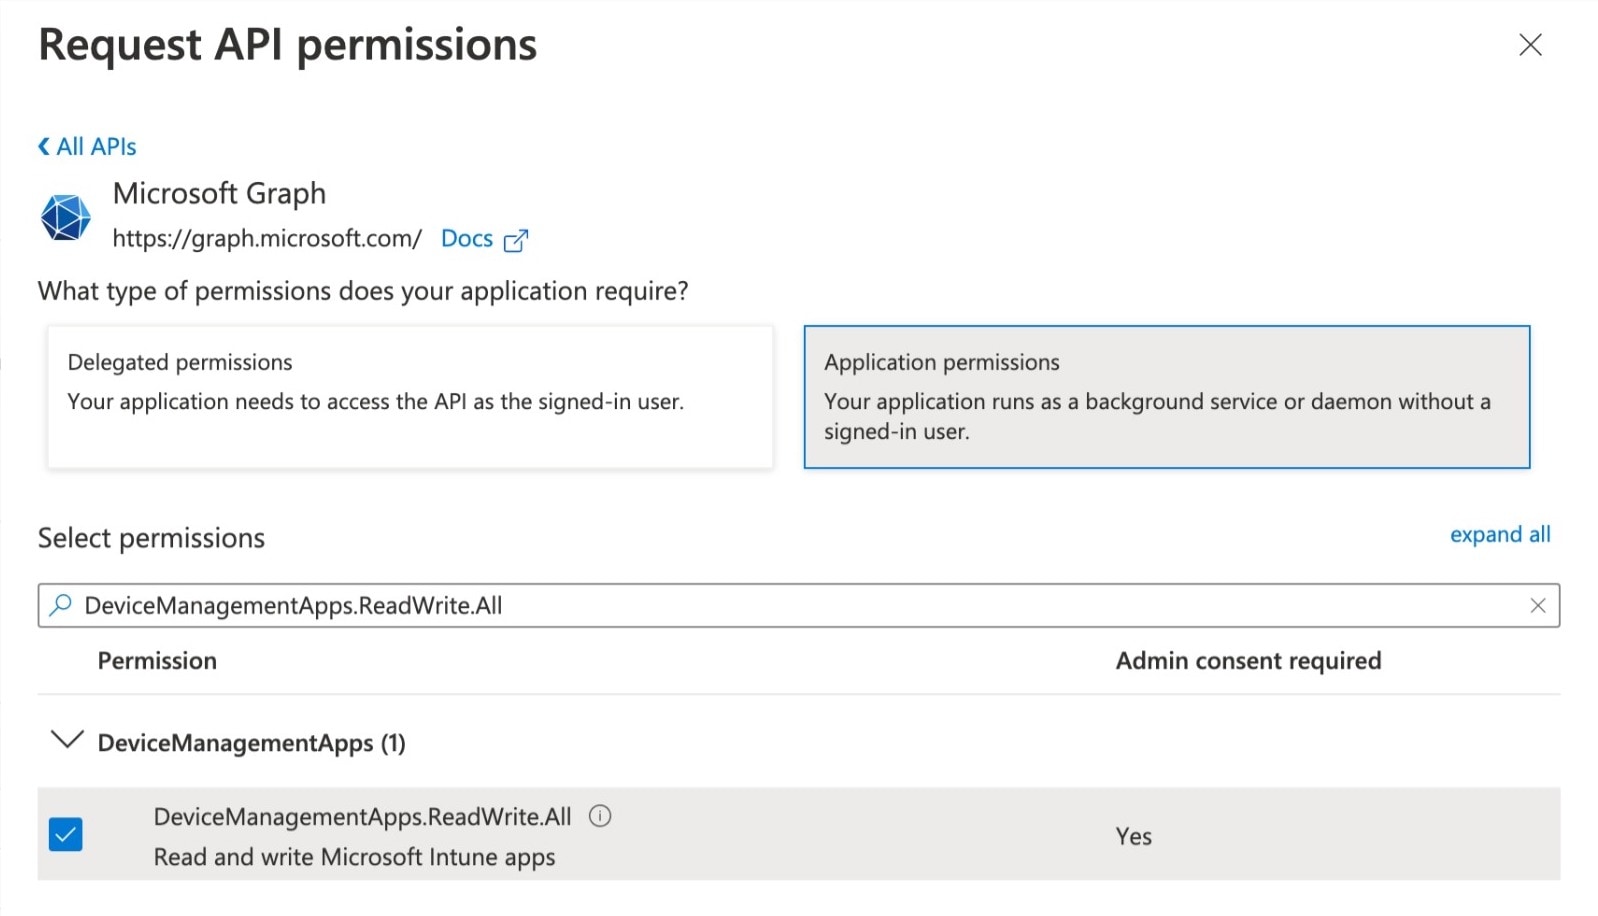 Assigning the DeviceManagementApps.ReadWrite.All API to the app registration